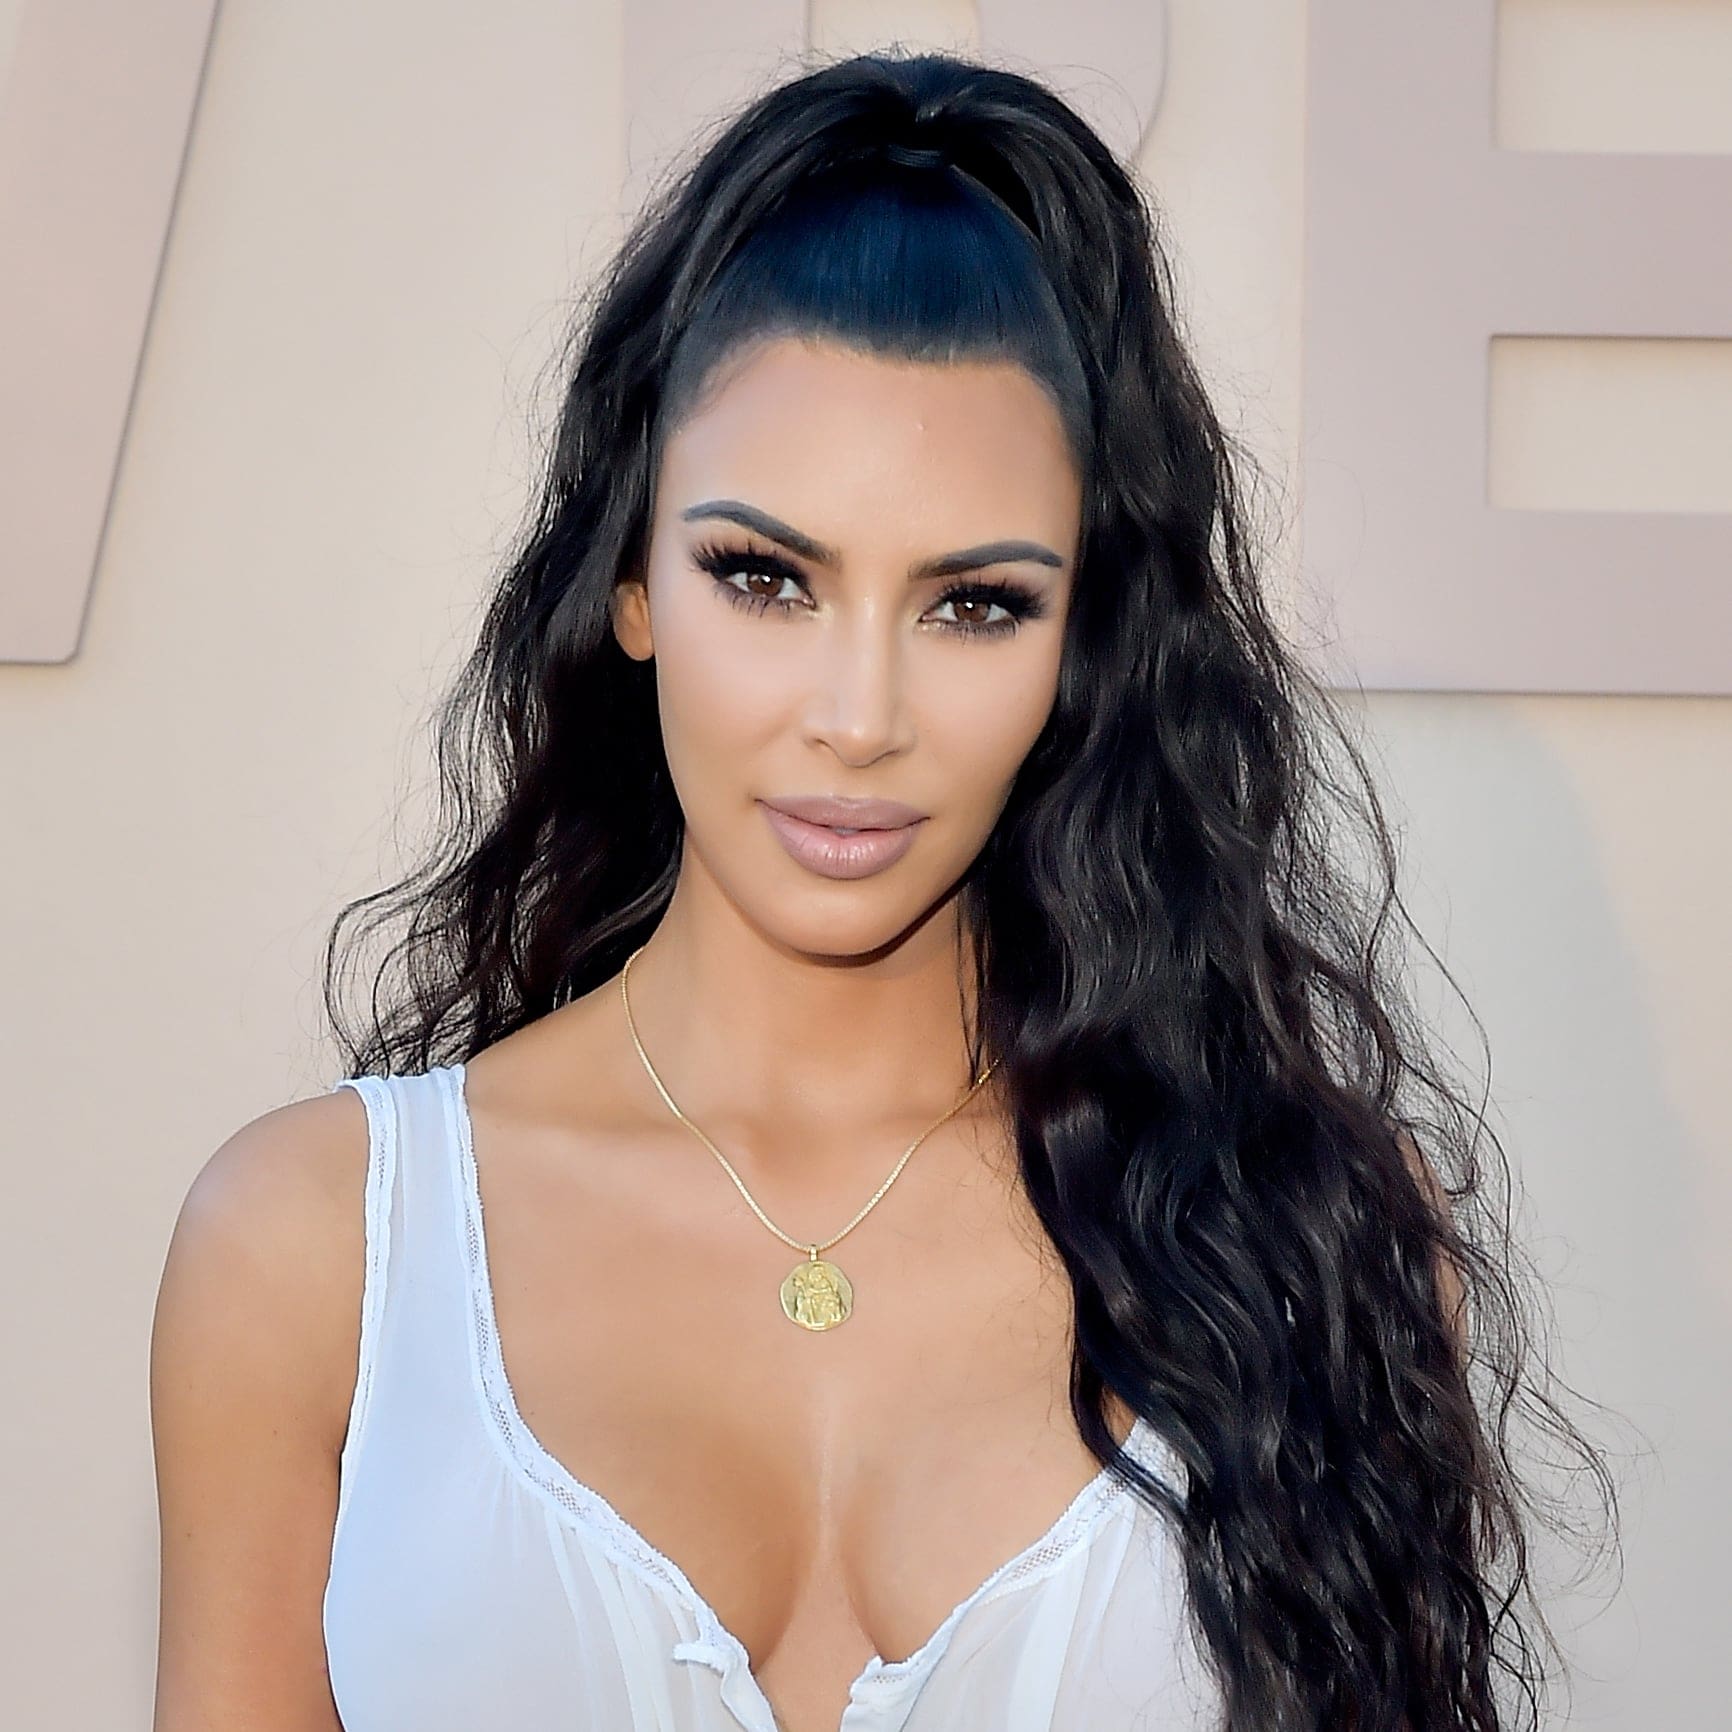 Kim Kardashian Is Praised By Fans After She Donates $1 Million To Help Amidst The Current Crisis In Armenia